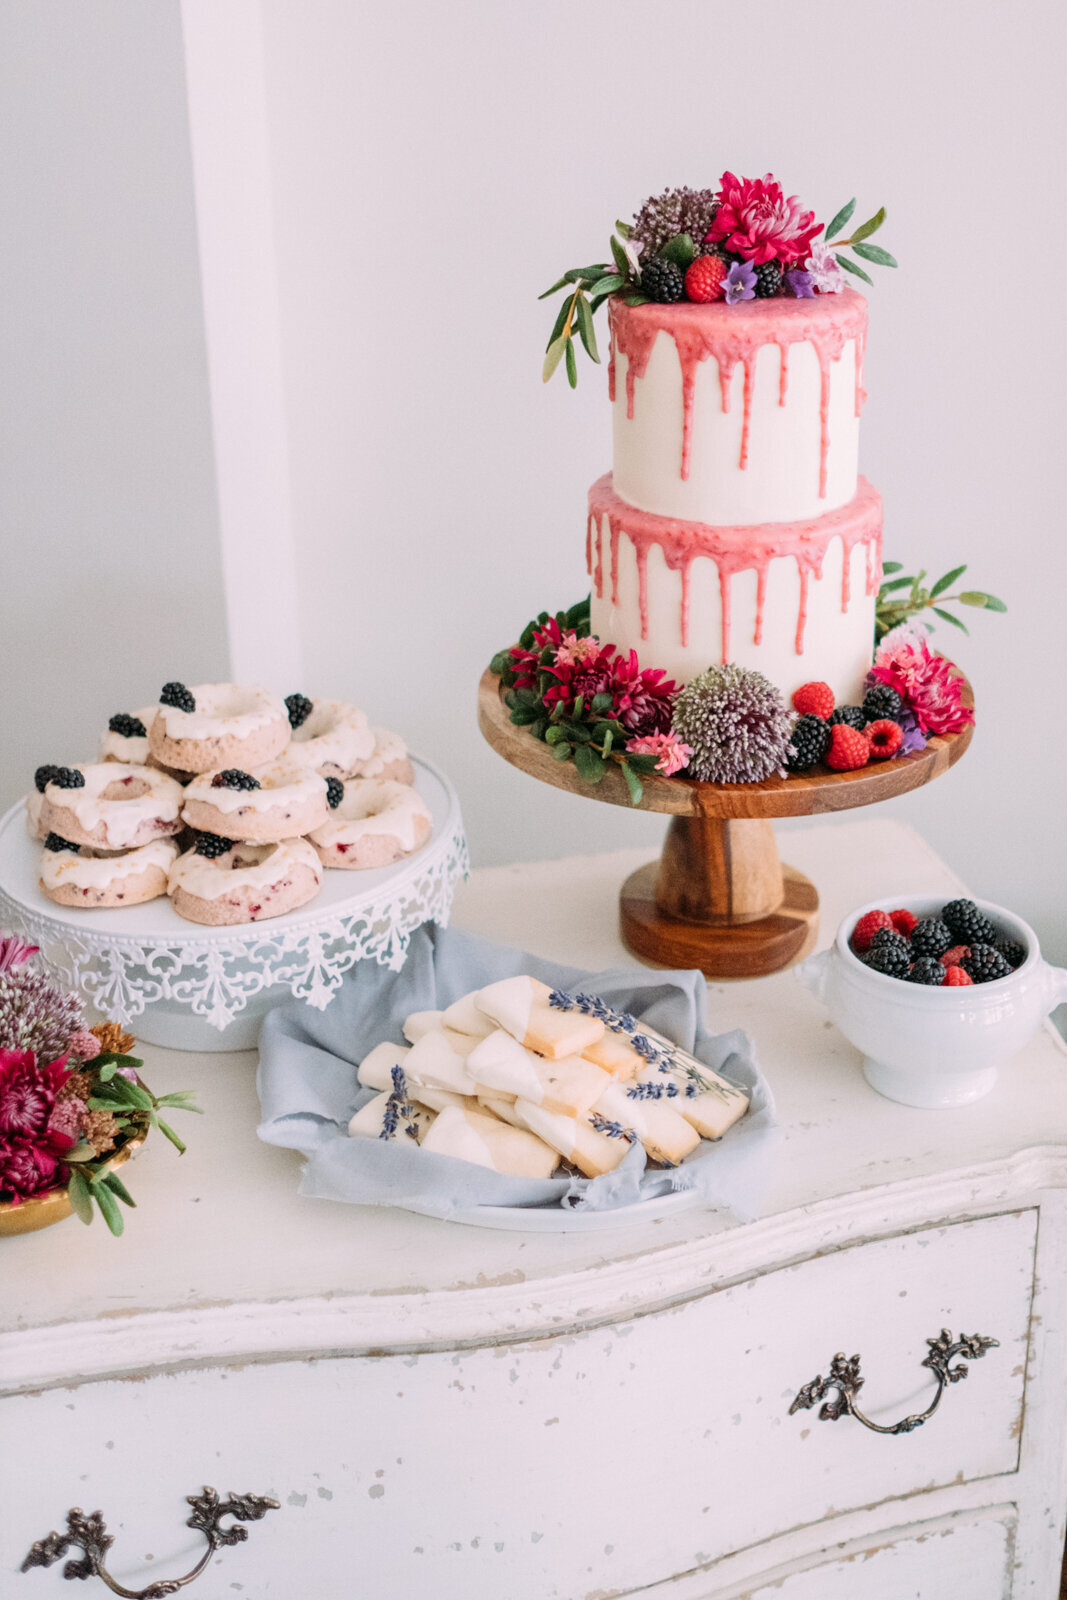 Two-tiered white and pink drip wedding cake, topped with vibrant florals, created by Bake My Day, contemporary cakes & desserts in Calgary, Alberta, featured on the Brontë Bride Vendor Guide.